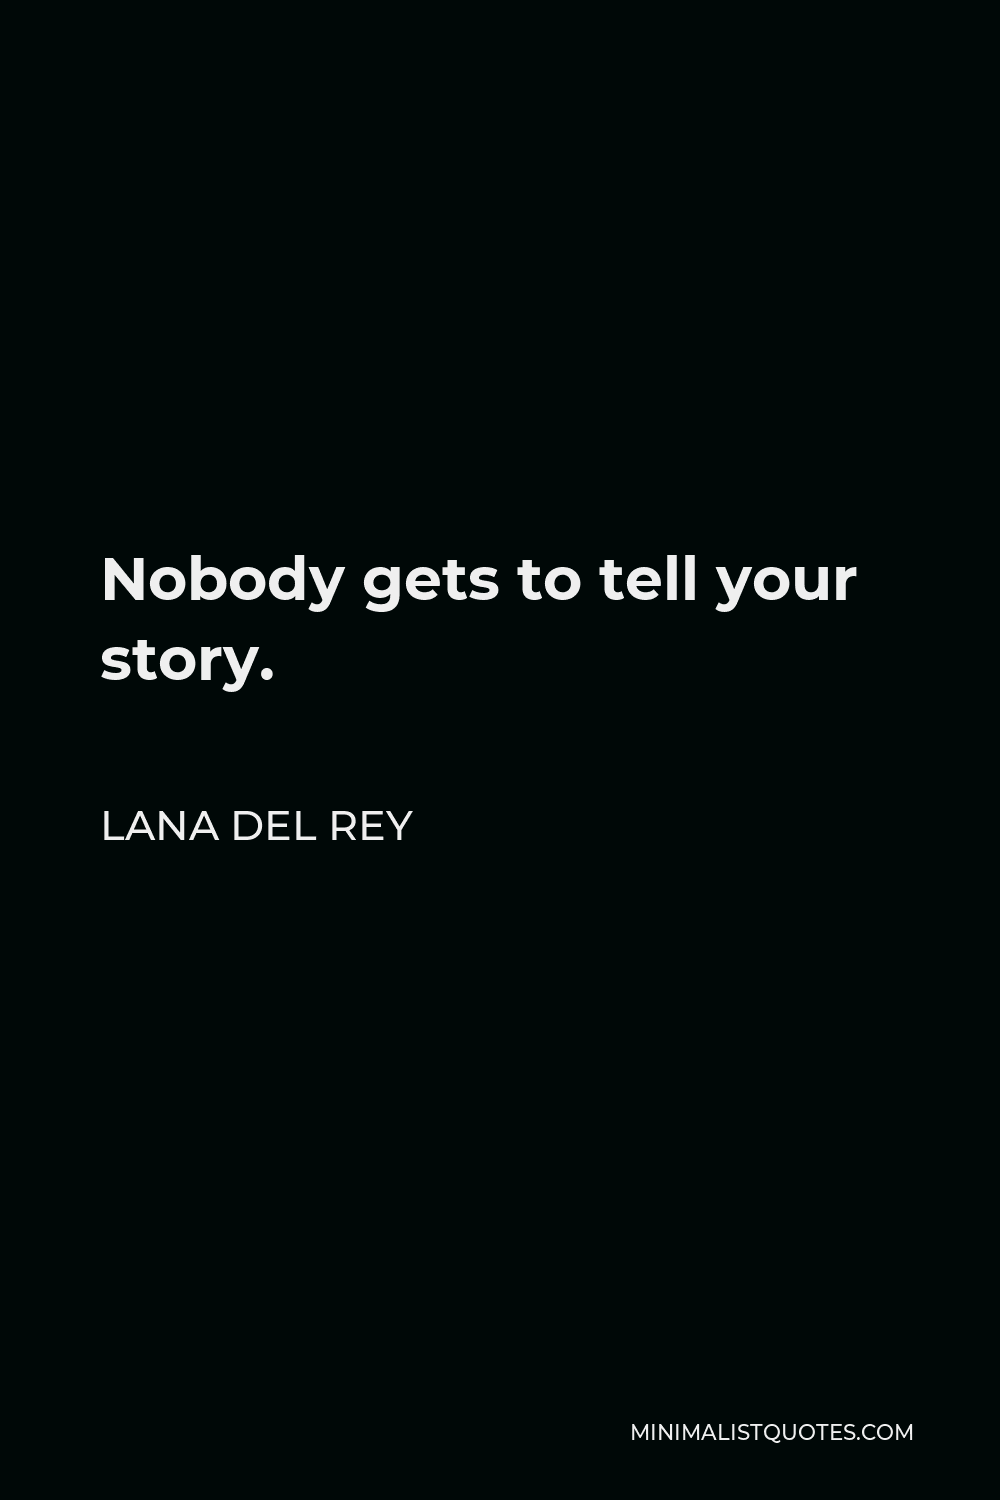 Lana Del Rey Quote To Be Honest Like When You Work At Something For A Long Time And Then Coming To A Family Of People Who Support What You Do Hmm You